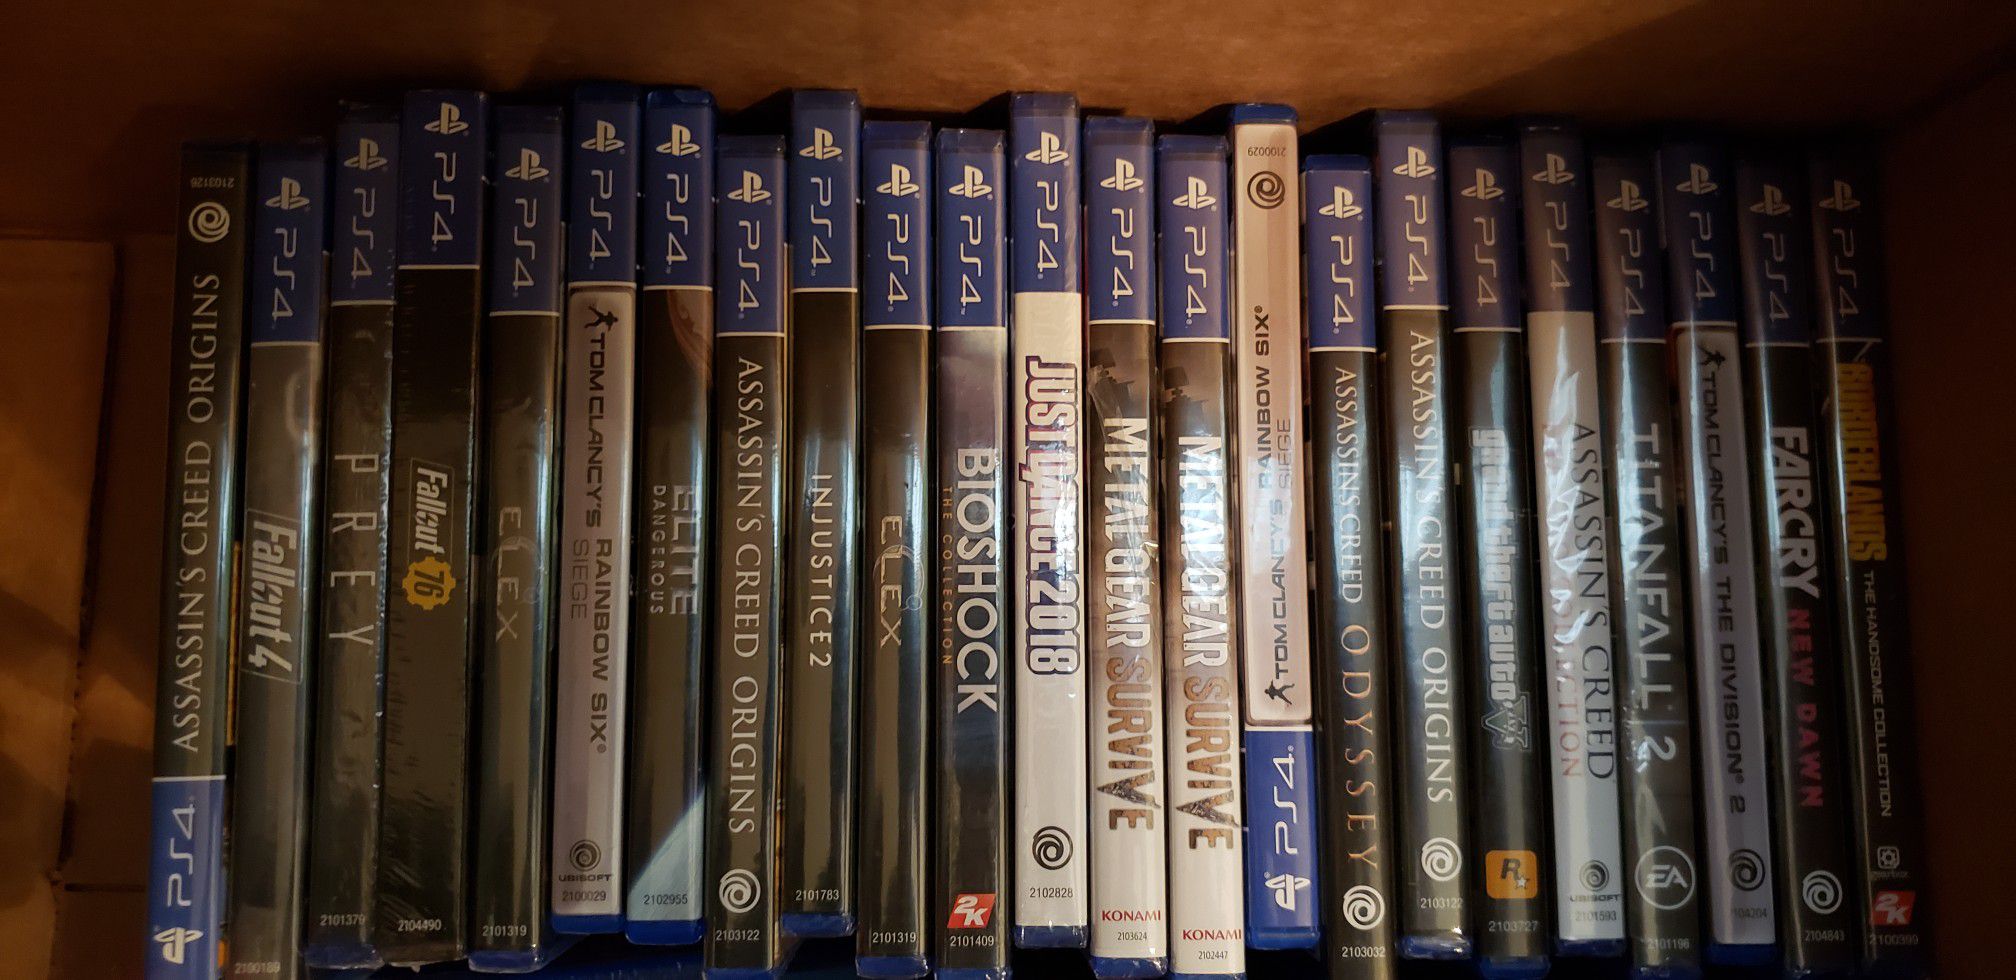 PS4 and PS3 games for sale! Message for prices. Discount for buying 3 or more!